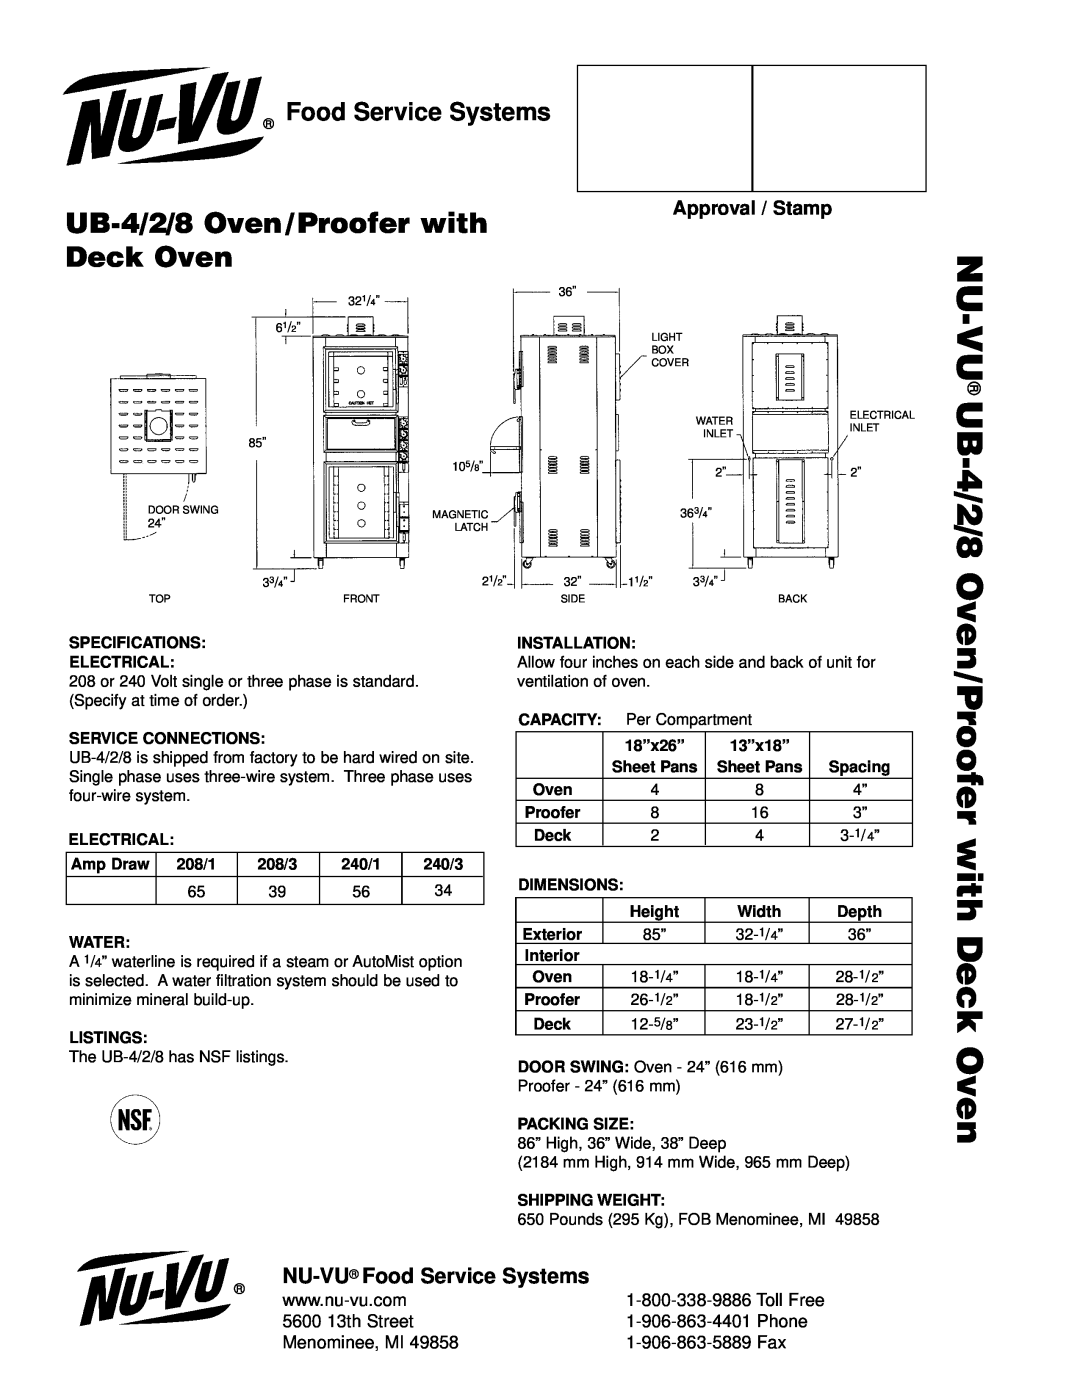 Middleby Cooking Systems Group manual VU UB-4/2/8, UB-4/2/8Oven/Proofer with Deck Oven, Food Service Systems, Phone 